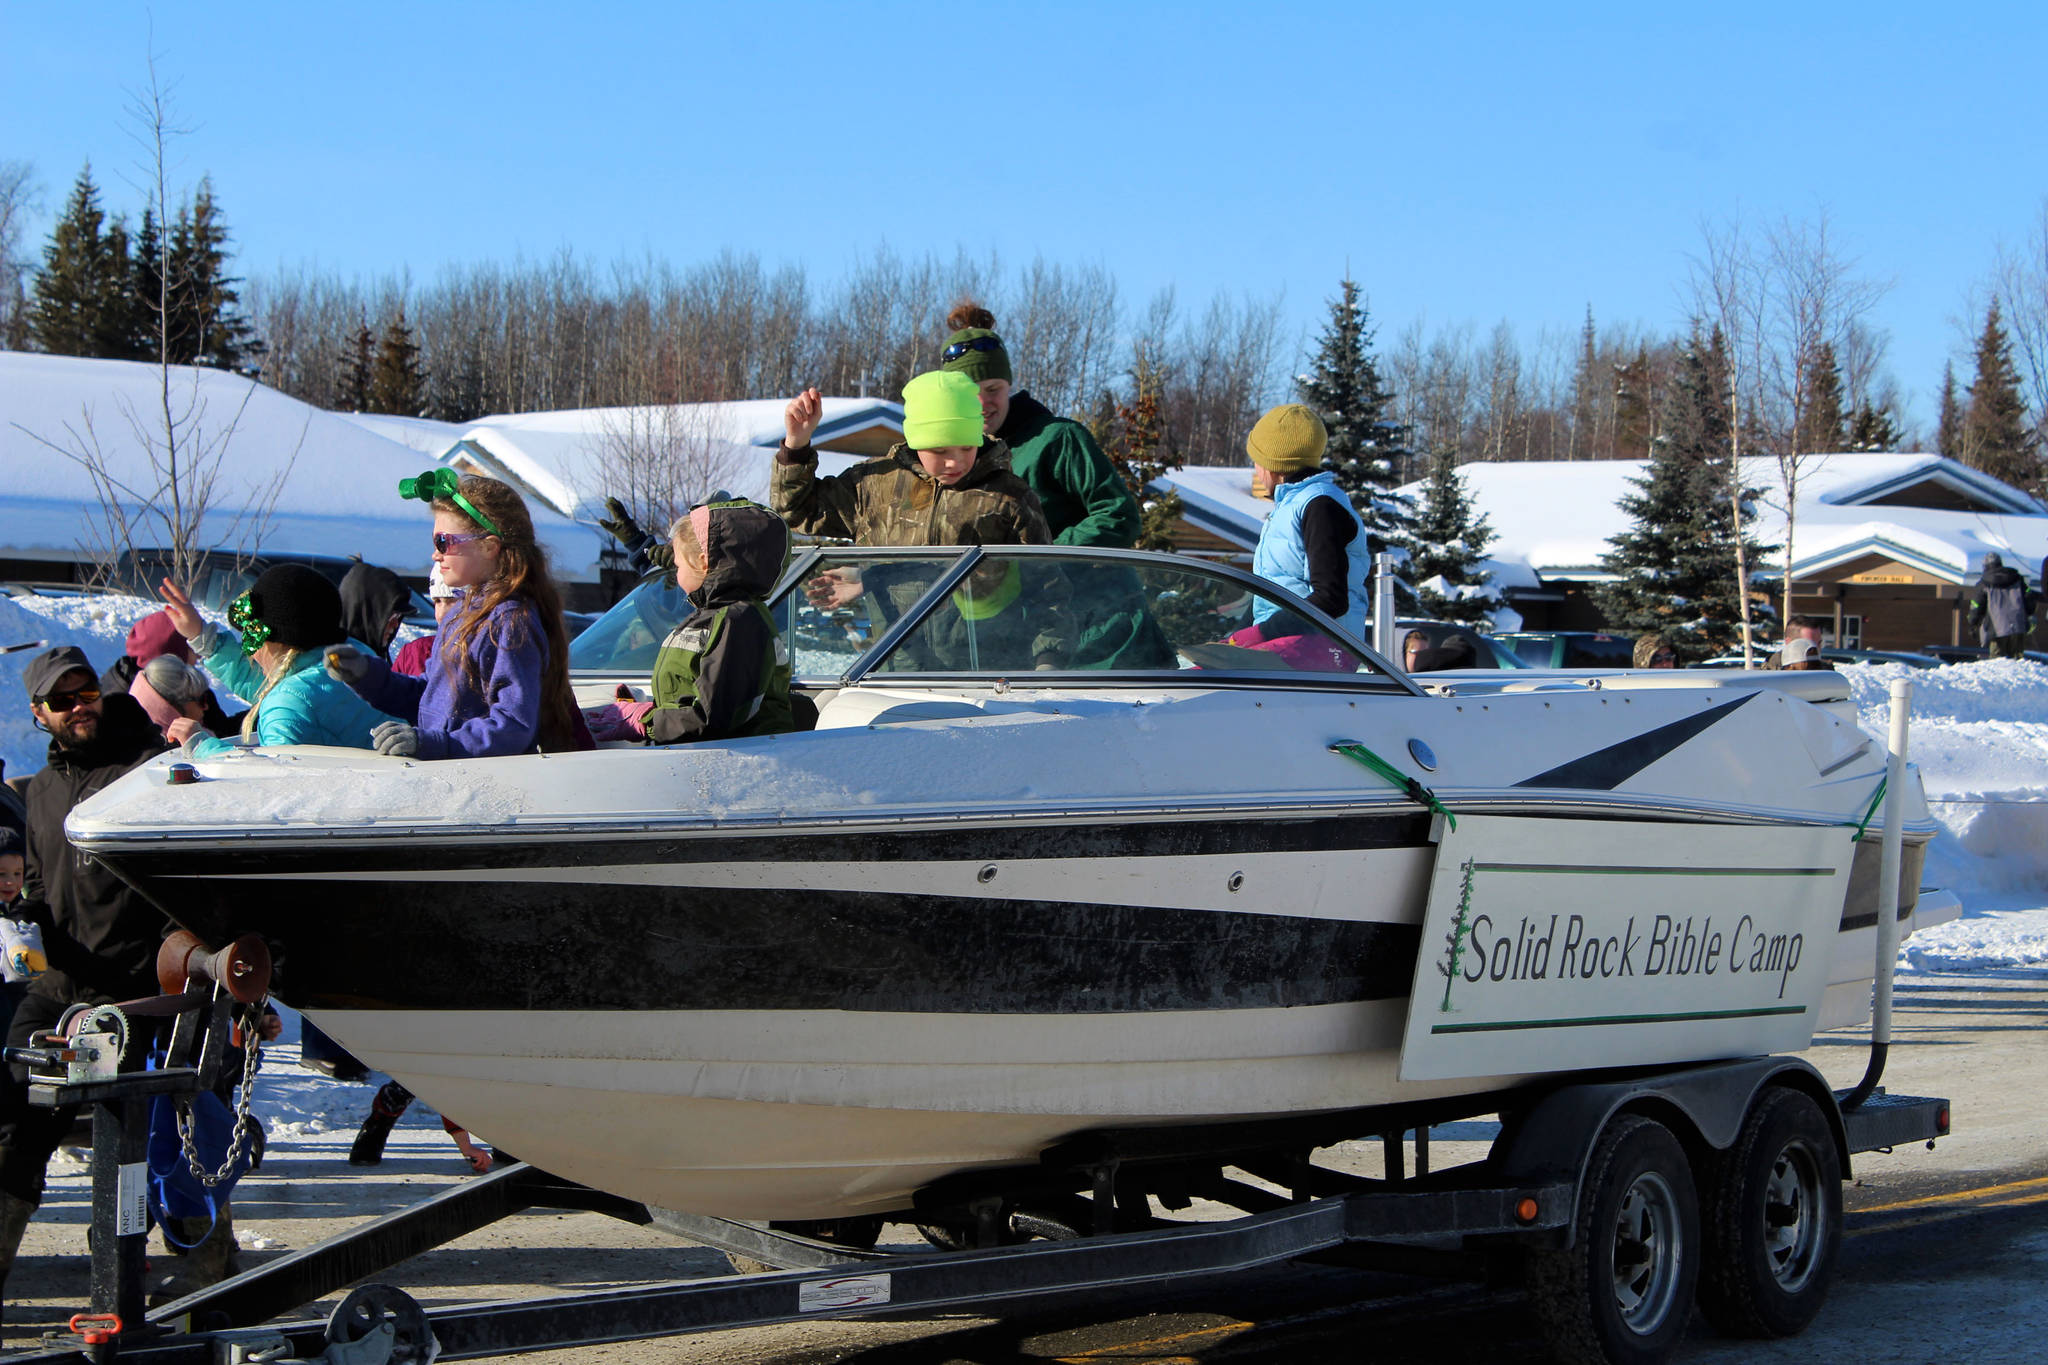 Participants with Solid Rock Bible Camp throw candy to parade-watchers during the 30th Annual Sweeney’s St. Patrick’s Day parade on Wednesday, March 17 in Soldotna, Alaska. (Ashlyn O’Hara/Peninsula Clarion)